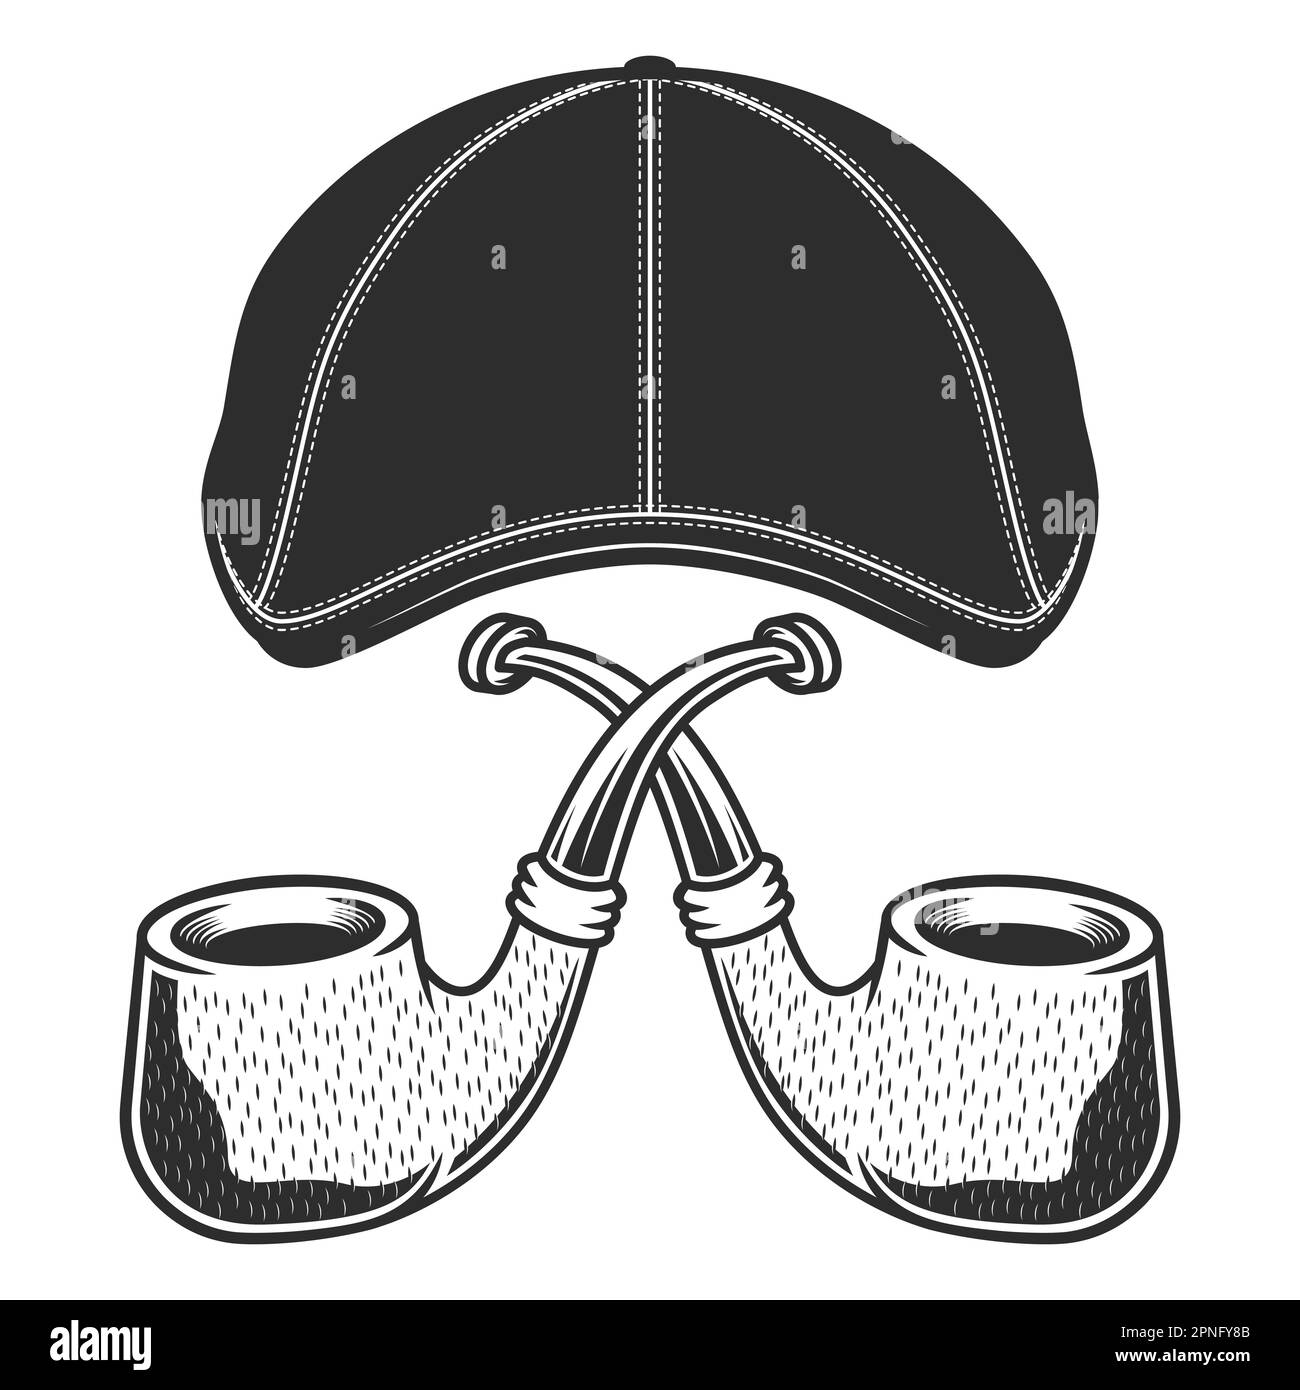 Flat cap gatsby tweed hat with constriction servise repair mechanic adjustable wrench vector vintage illustration Stock Vector